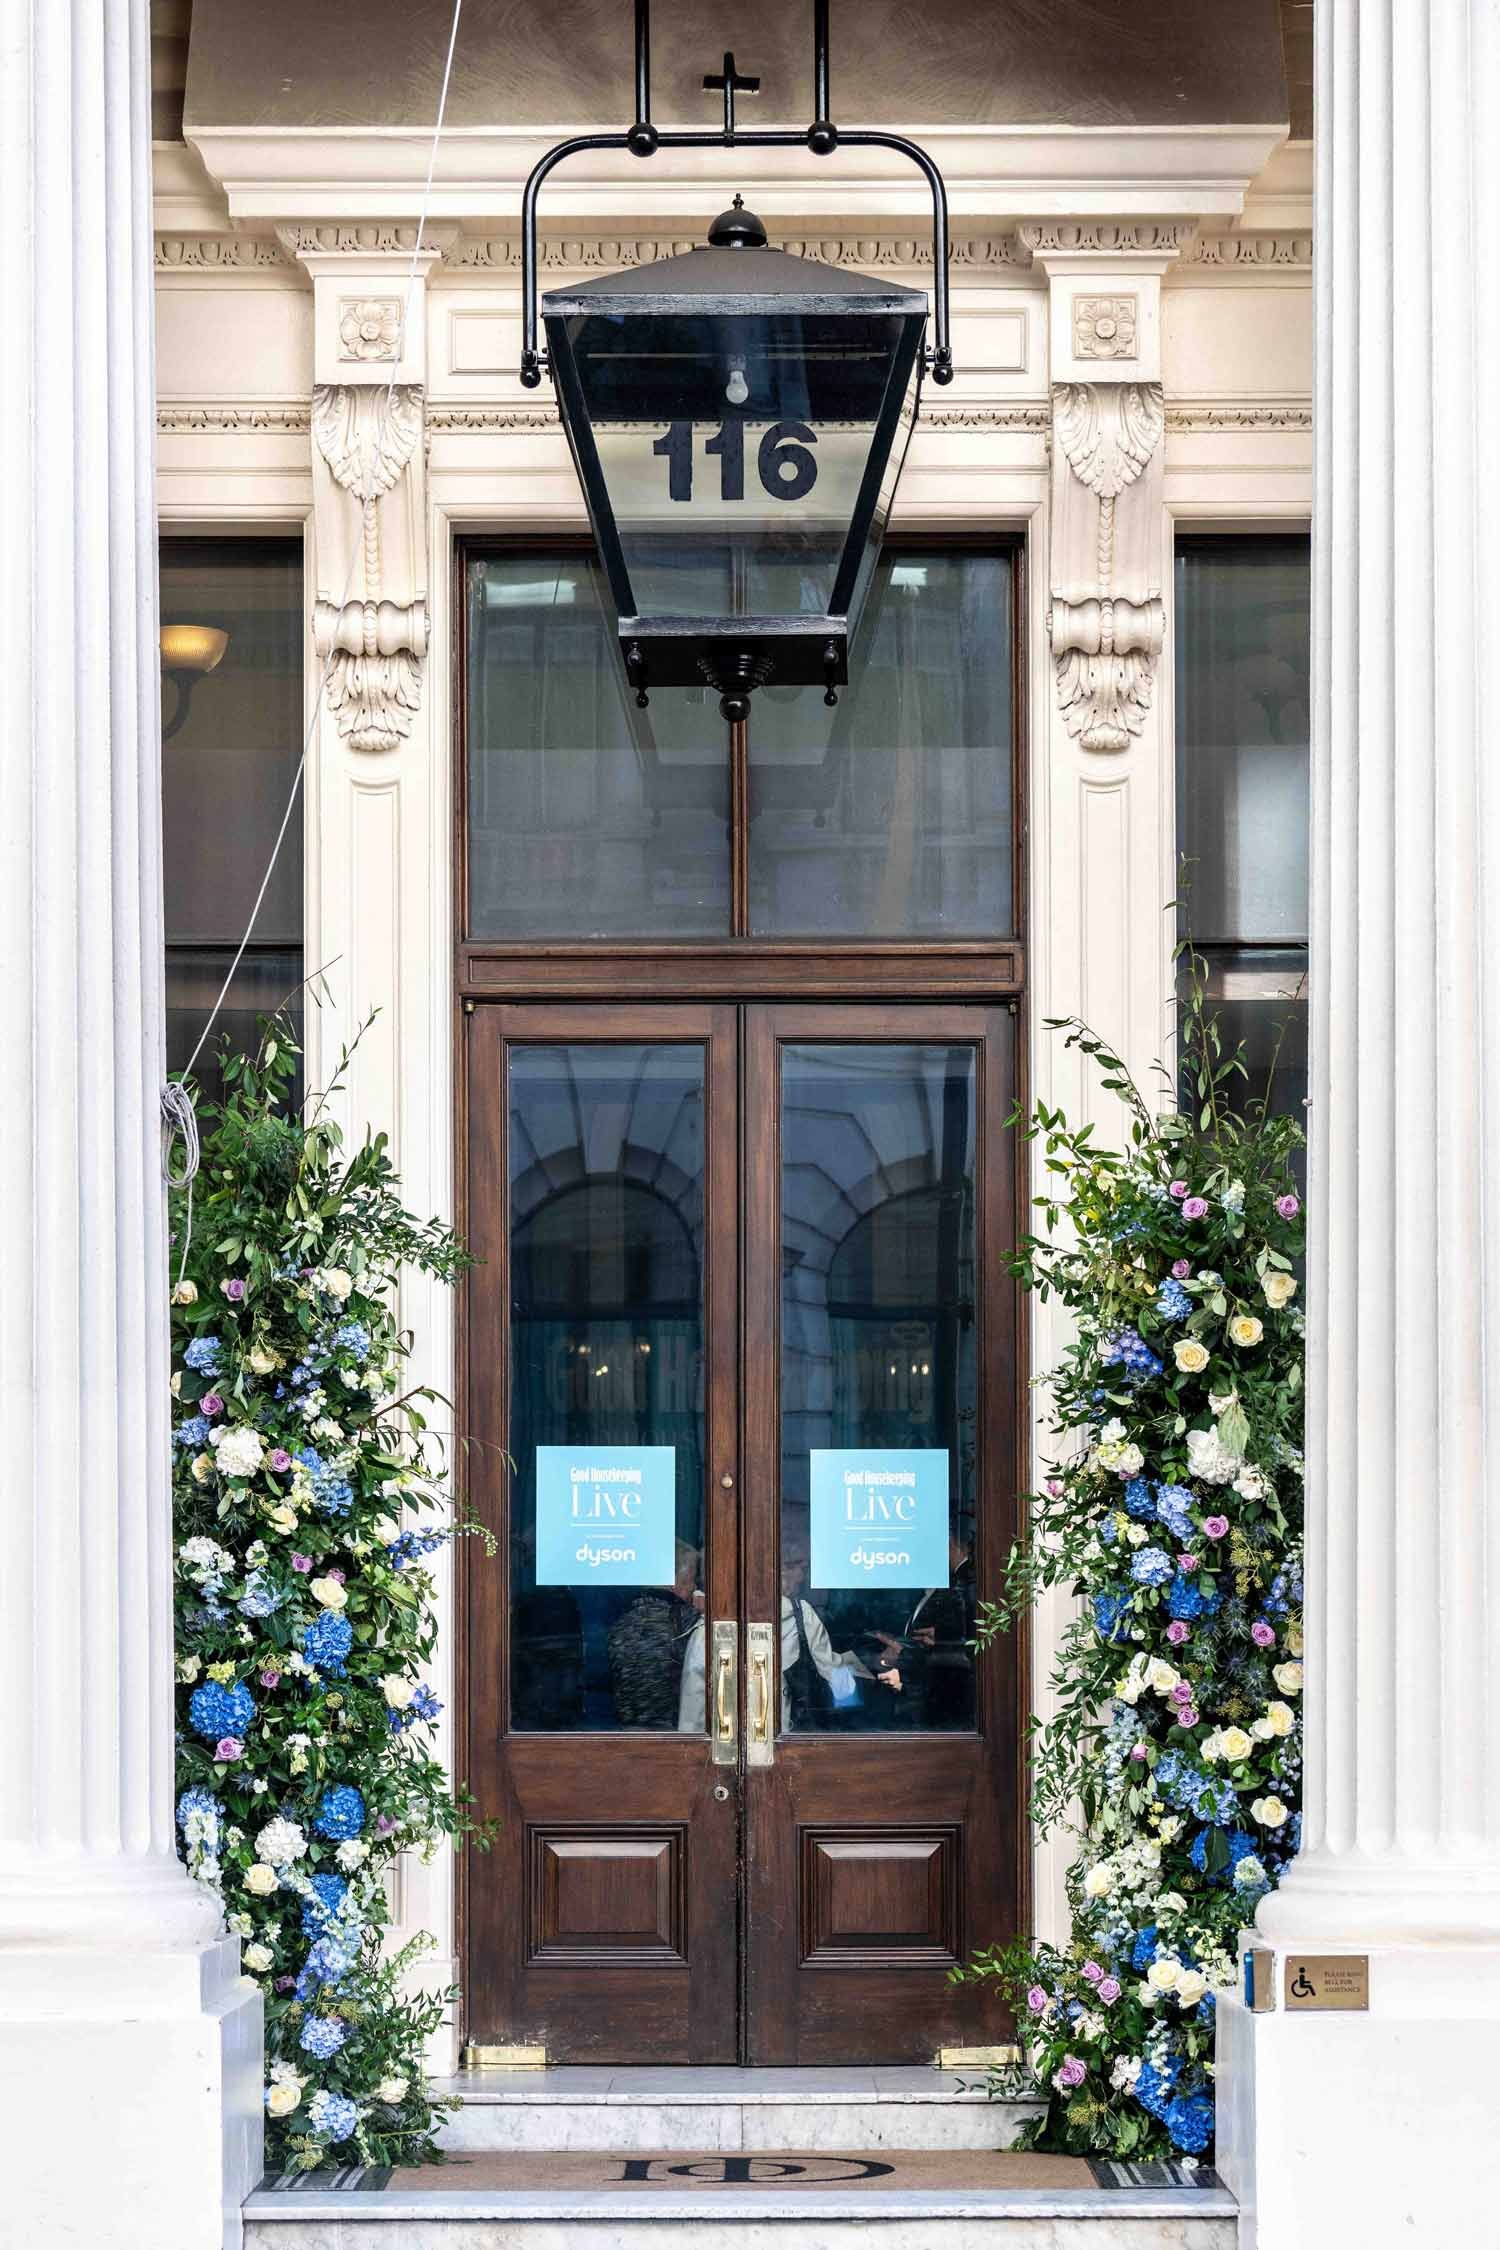 Good Housekeeping Live 116 Pall Mall Front Doors